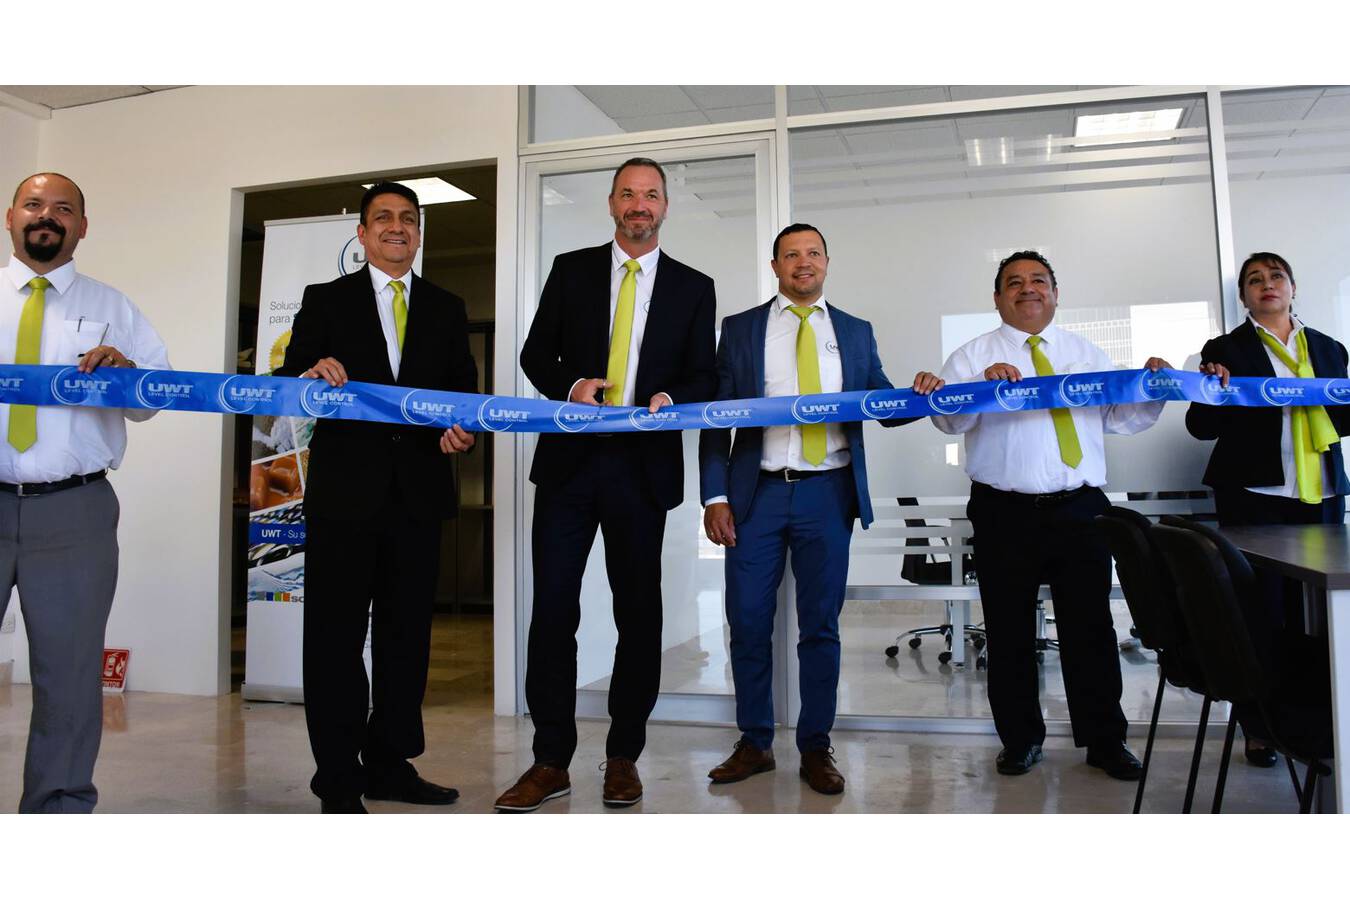 UWT opens office in Mexico In the 45th year of existence of UWT GmbH, the 7th international sales office is now founded in Mexico. With its own branch office UWT Level Control de S. de RL de C.V. in Santiago de Querétaro, Country Manager José Cruz is introduced.